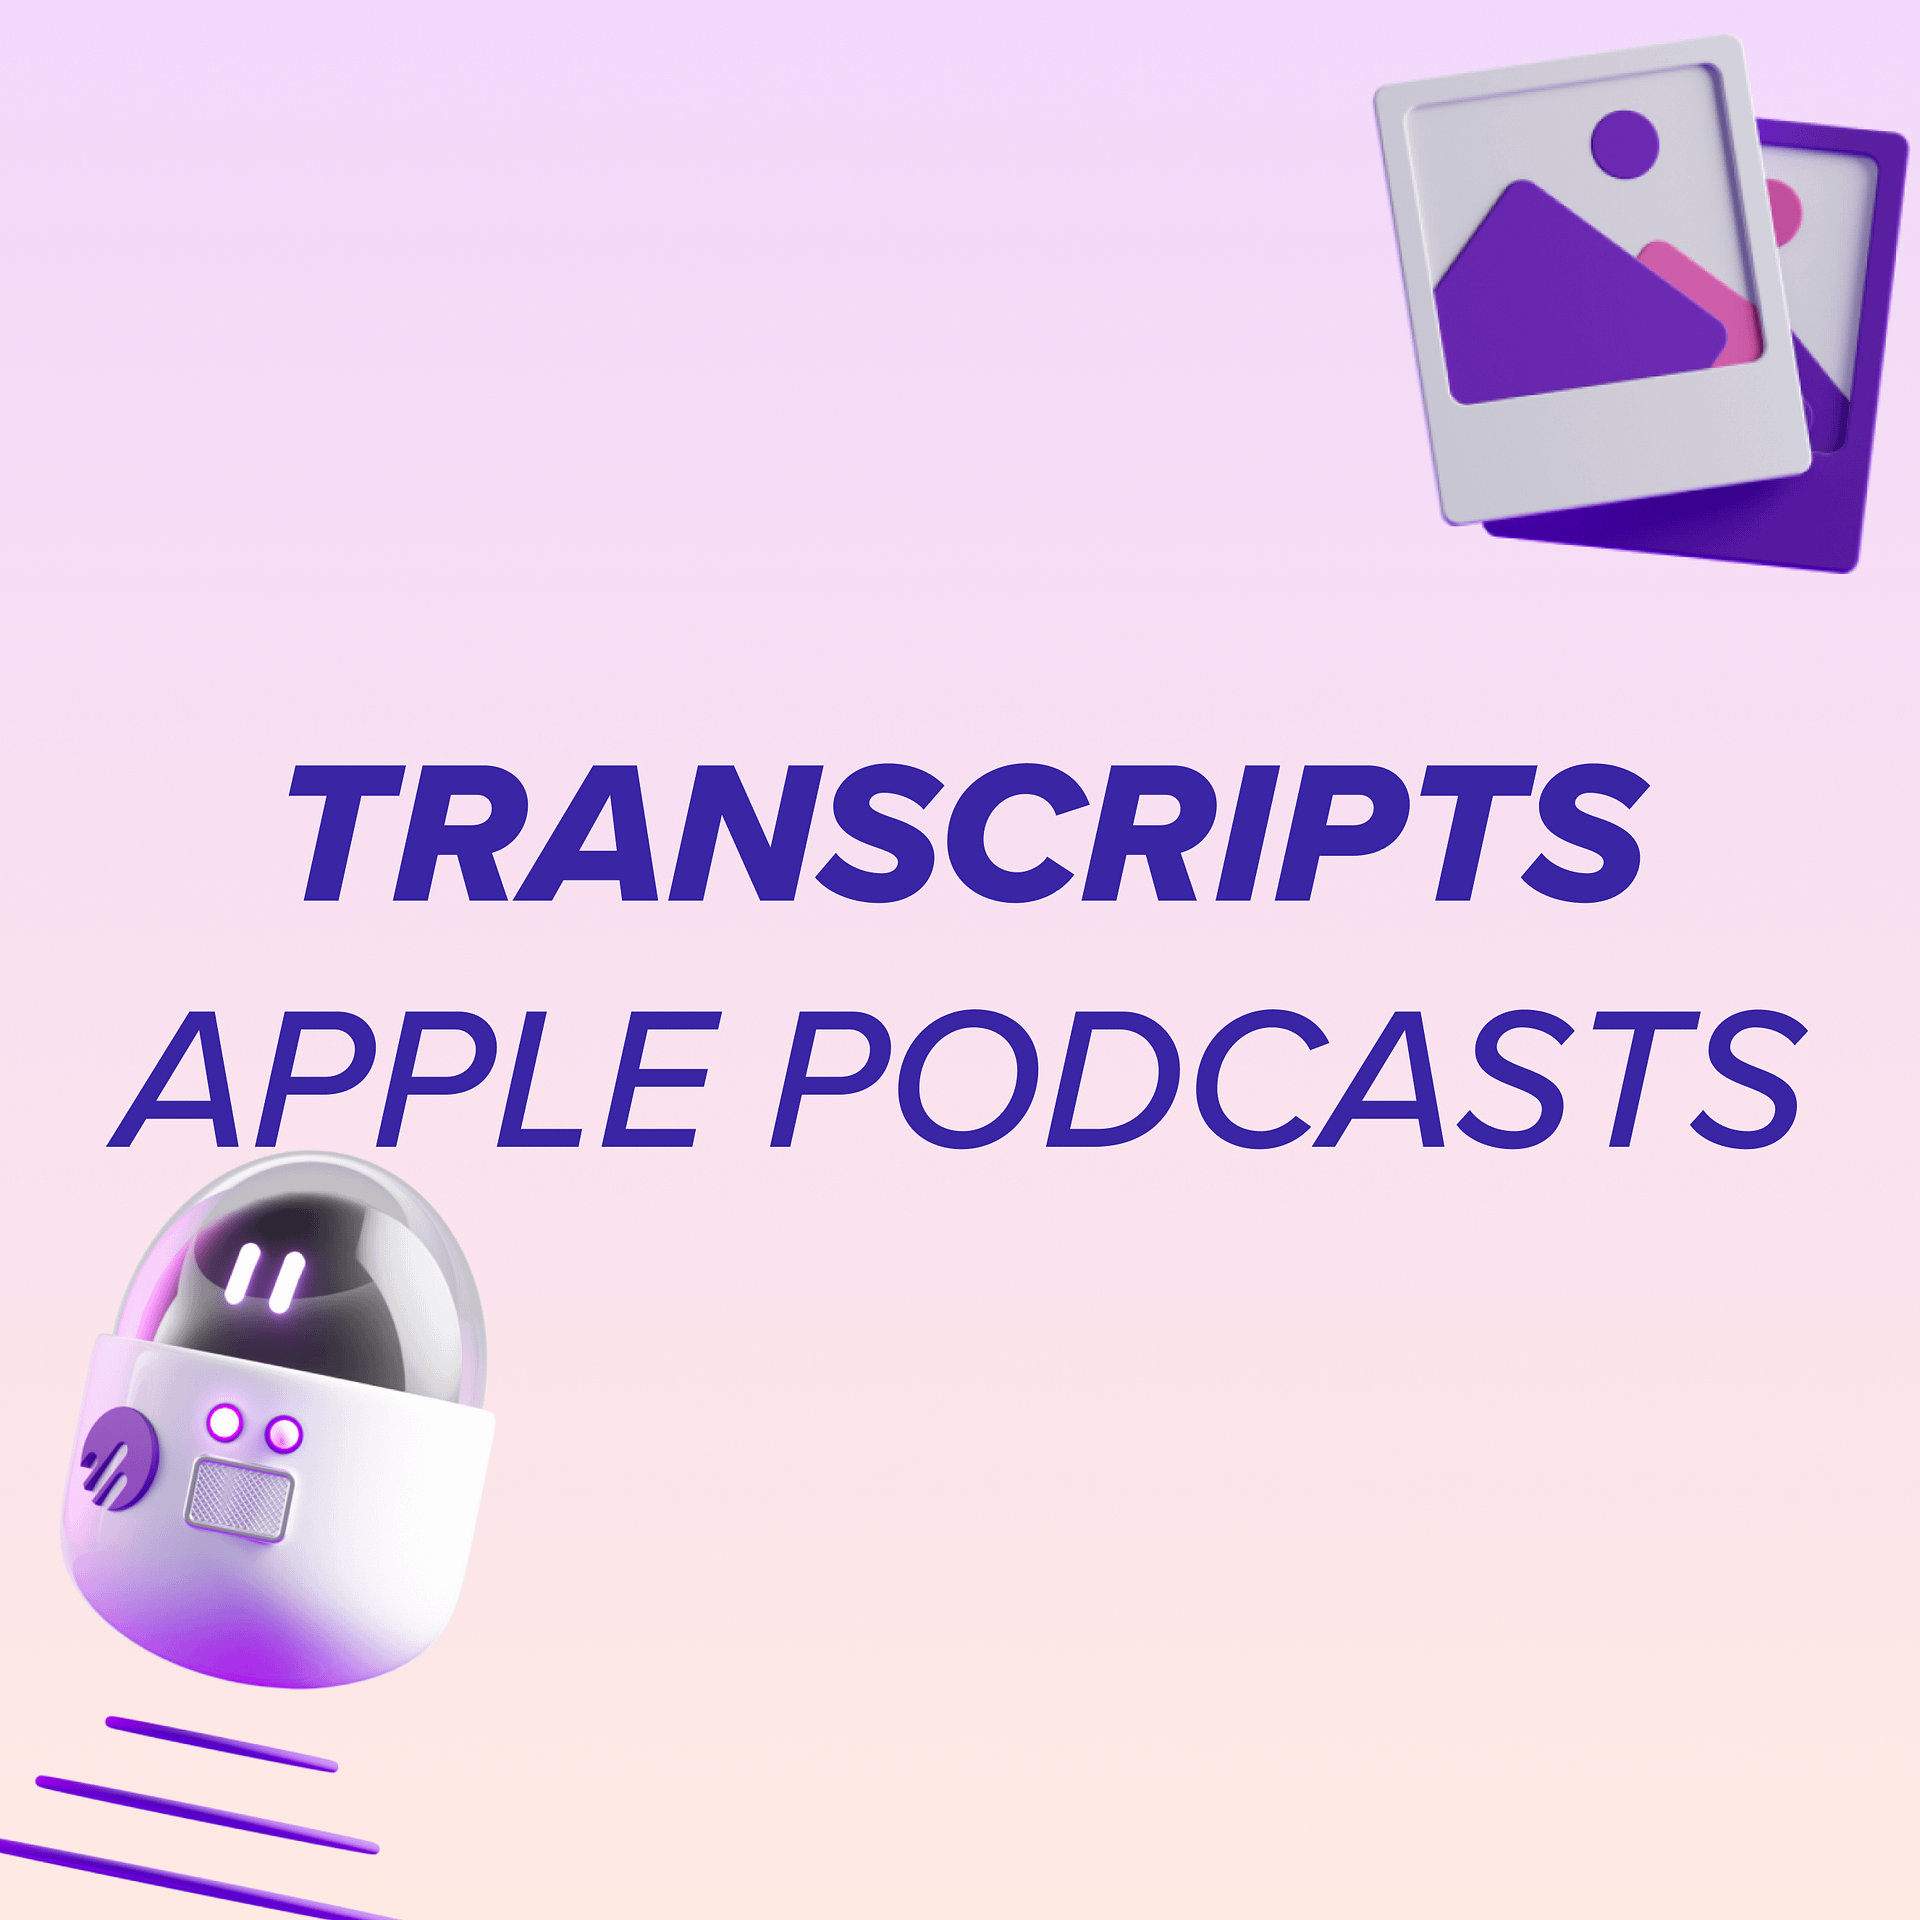 Apple Podcasts Introduces Transcripts